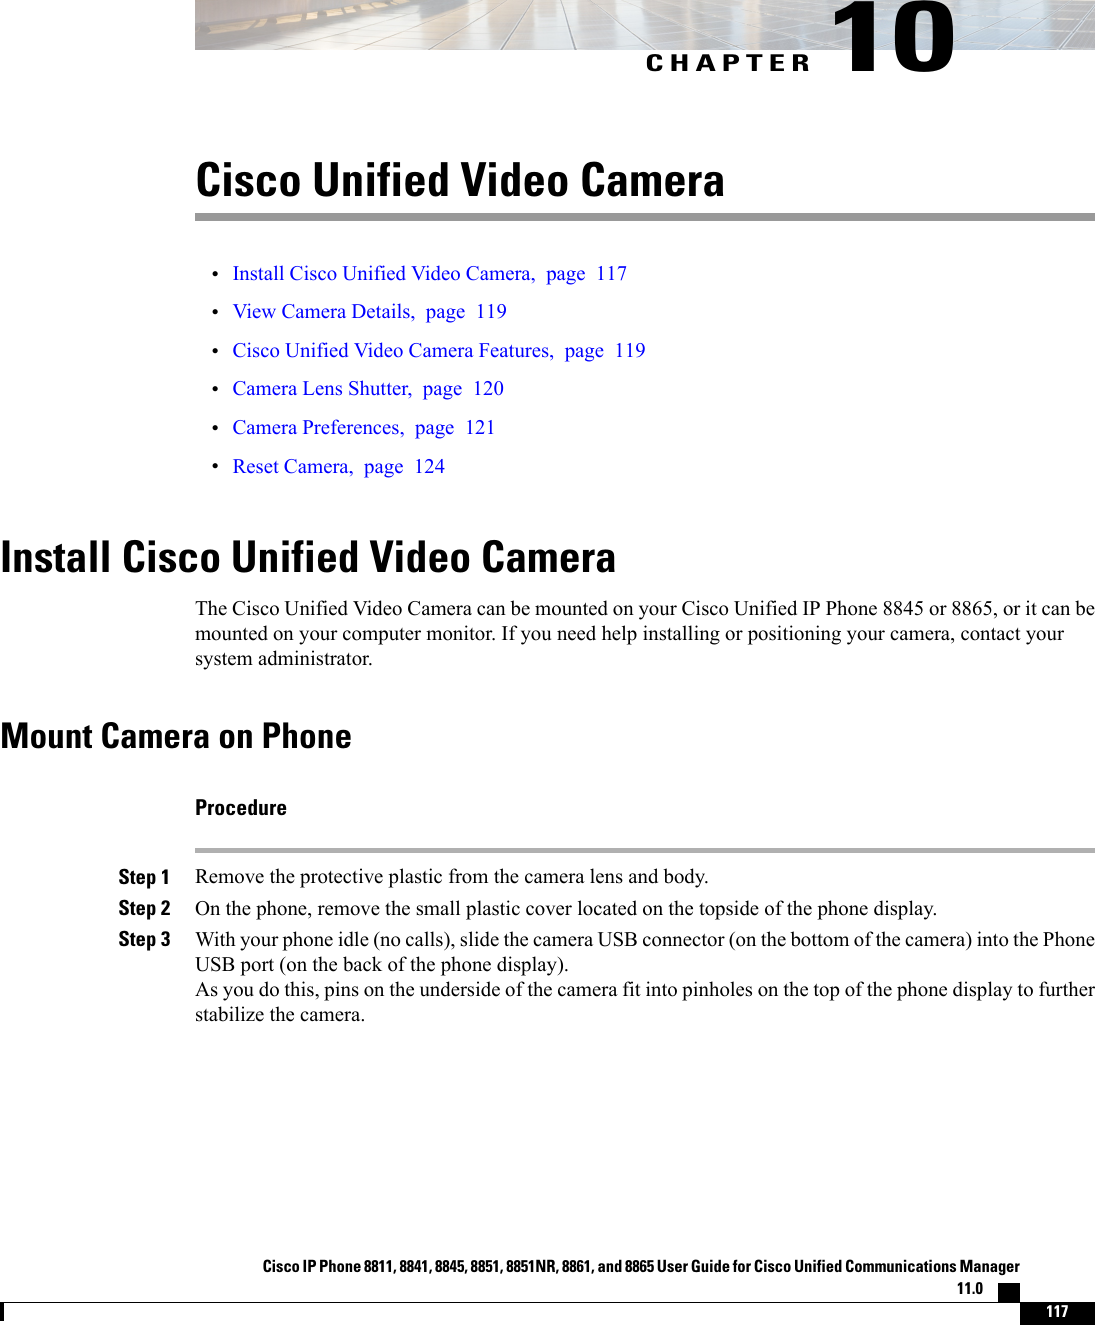 CHAPTER 10Cisco Unified Video Camera•Install Cisco Unified Video Camera, page 117•View Camera Details, page 119•Cisco Unified Video Camera Features, page 119•Camera Lens Shutter, page 120•Camera Preferences, page 121•Reset Camera, page 124Install Cisco Unified Video CameraThe Cisco Unified Video Camera can be mounted on your Cisco Unified IP Phone 8845 or 8865, or it can bemounted on your computer monitor. If you need help installing or positioning your camera, contact yoursystem administrator.Mount Camera on PhoneProcedureStep 1 Remove the protective plastic from the camera lens and body.Step 2 On the phone, remove the small plastic cover located on the topside of the phone display.Step 3 With your phone idle (no calls), slide the camera USB connector (on the bottom of the camera) into the PhoneUSB port (on the back of the phone display).As you do this, pins on the underside of the camera fit into pinholes on the top of the phone display to furtherstabilize the camera.Cisco IP Phone 8811, 8841, 8845, 8851, 8851NR, 8861, and 8865 User Guide for Cisco Unified Communications Manager11.0    117